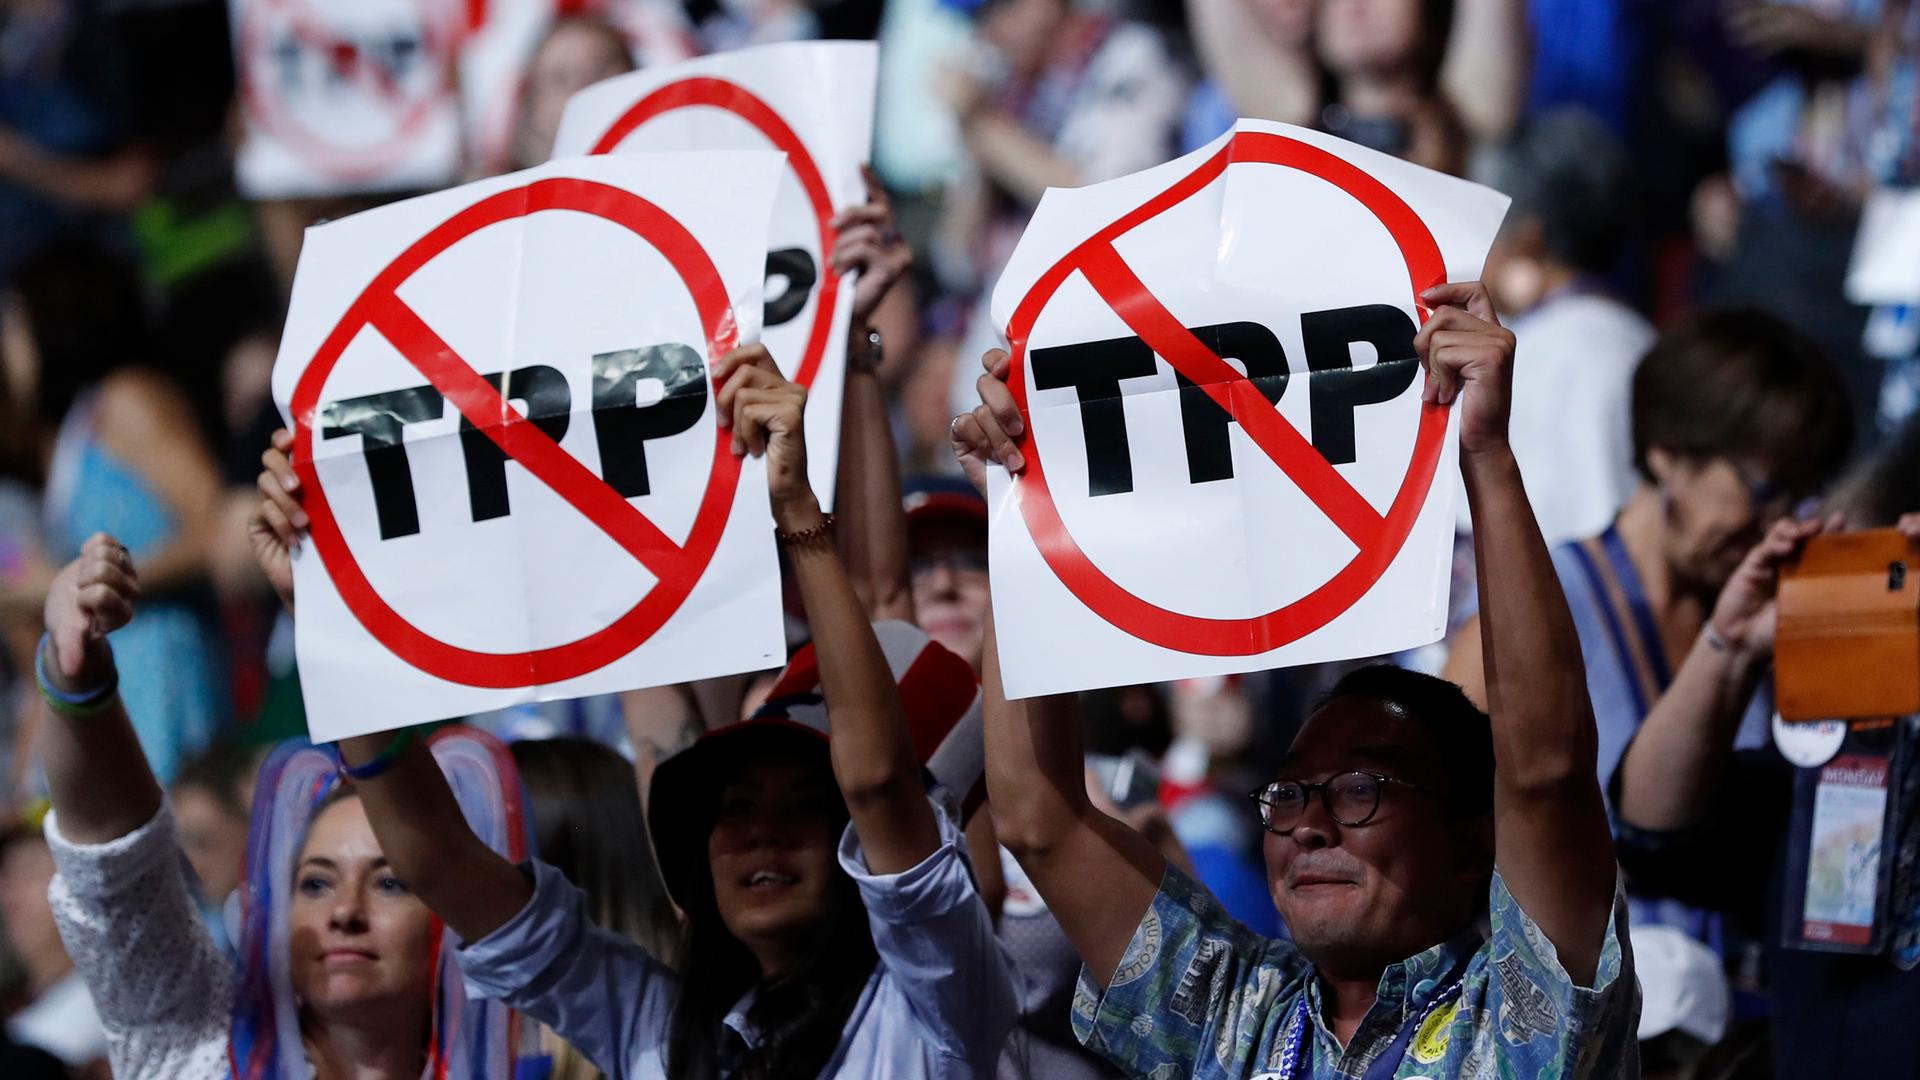 Delegates protesting against the Trans Pacific Partnership (TPP) trade agreement hold up signs during the first sesssion of the Democratic National Convention in Philadelphia. , Pe